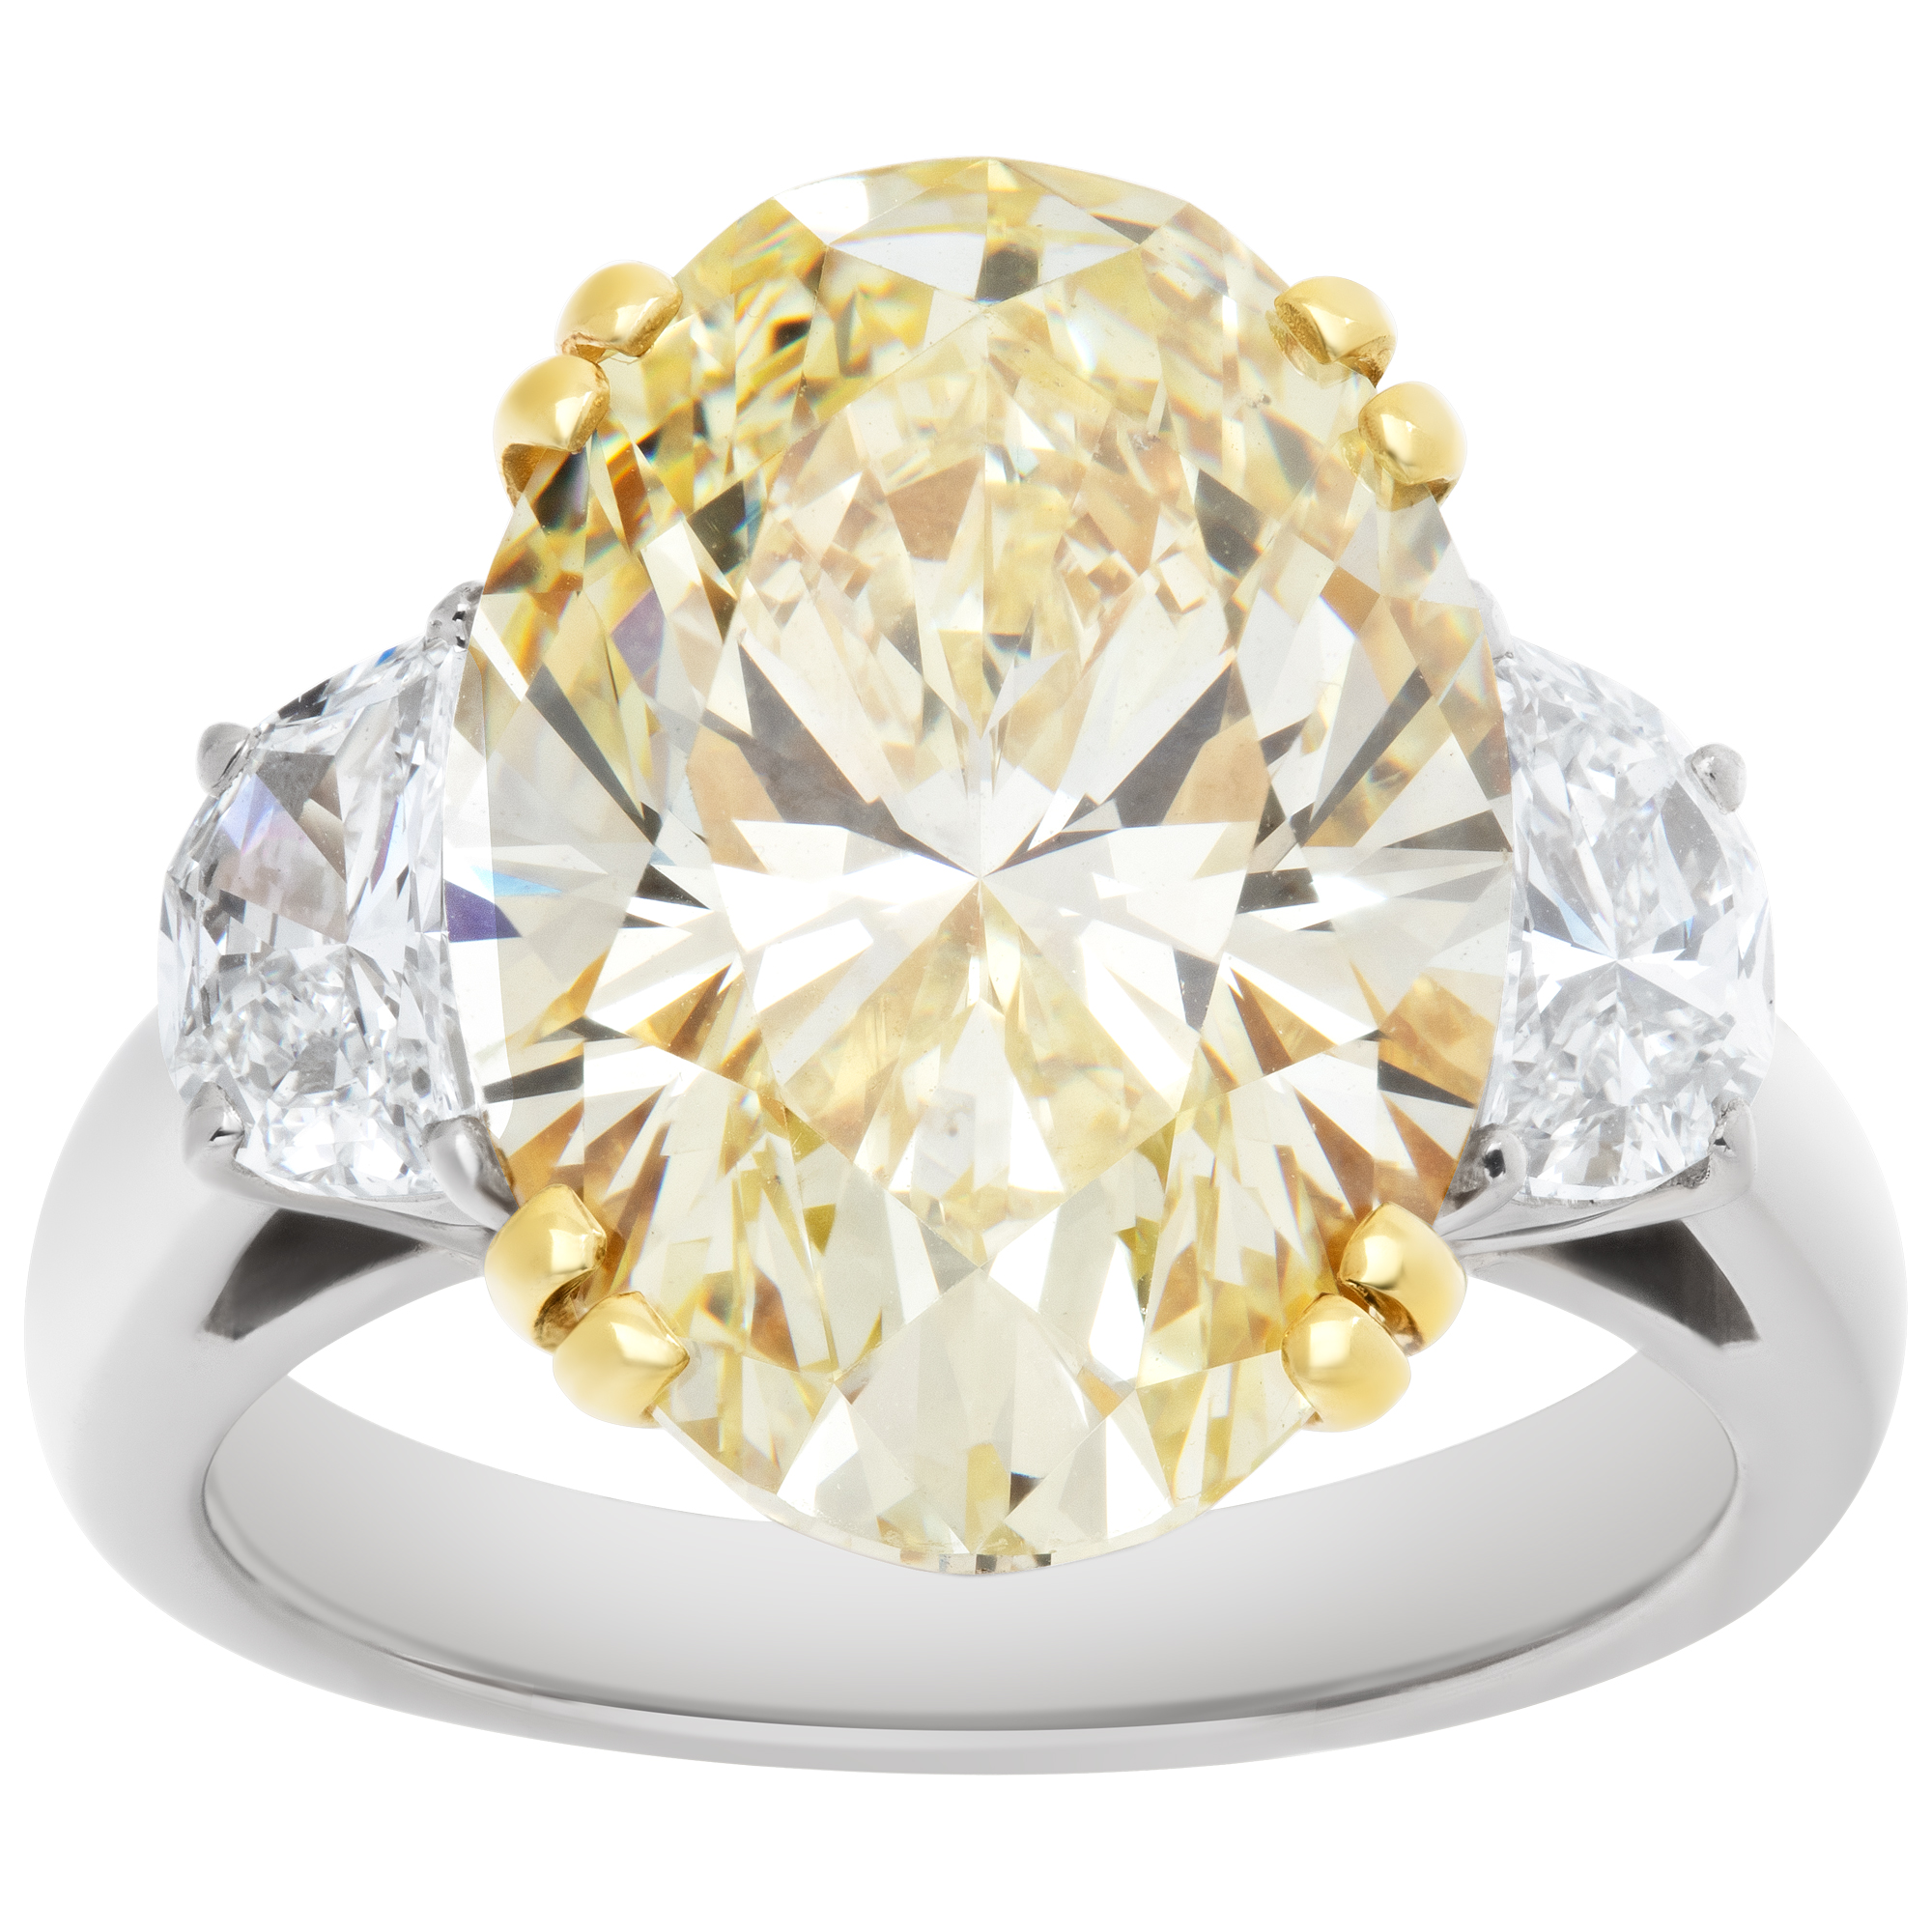 Gia Certified 8.01 carat oval fancy light yellow color- VS2 clarity, with 2 half moon cut diamonds  on each side set in Platinum and 18K yellow gold mounting.